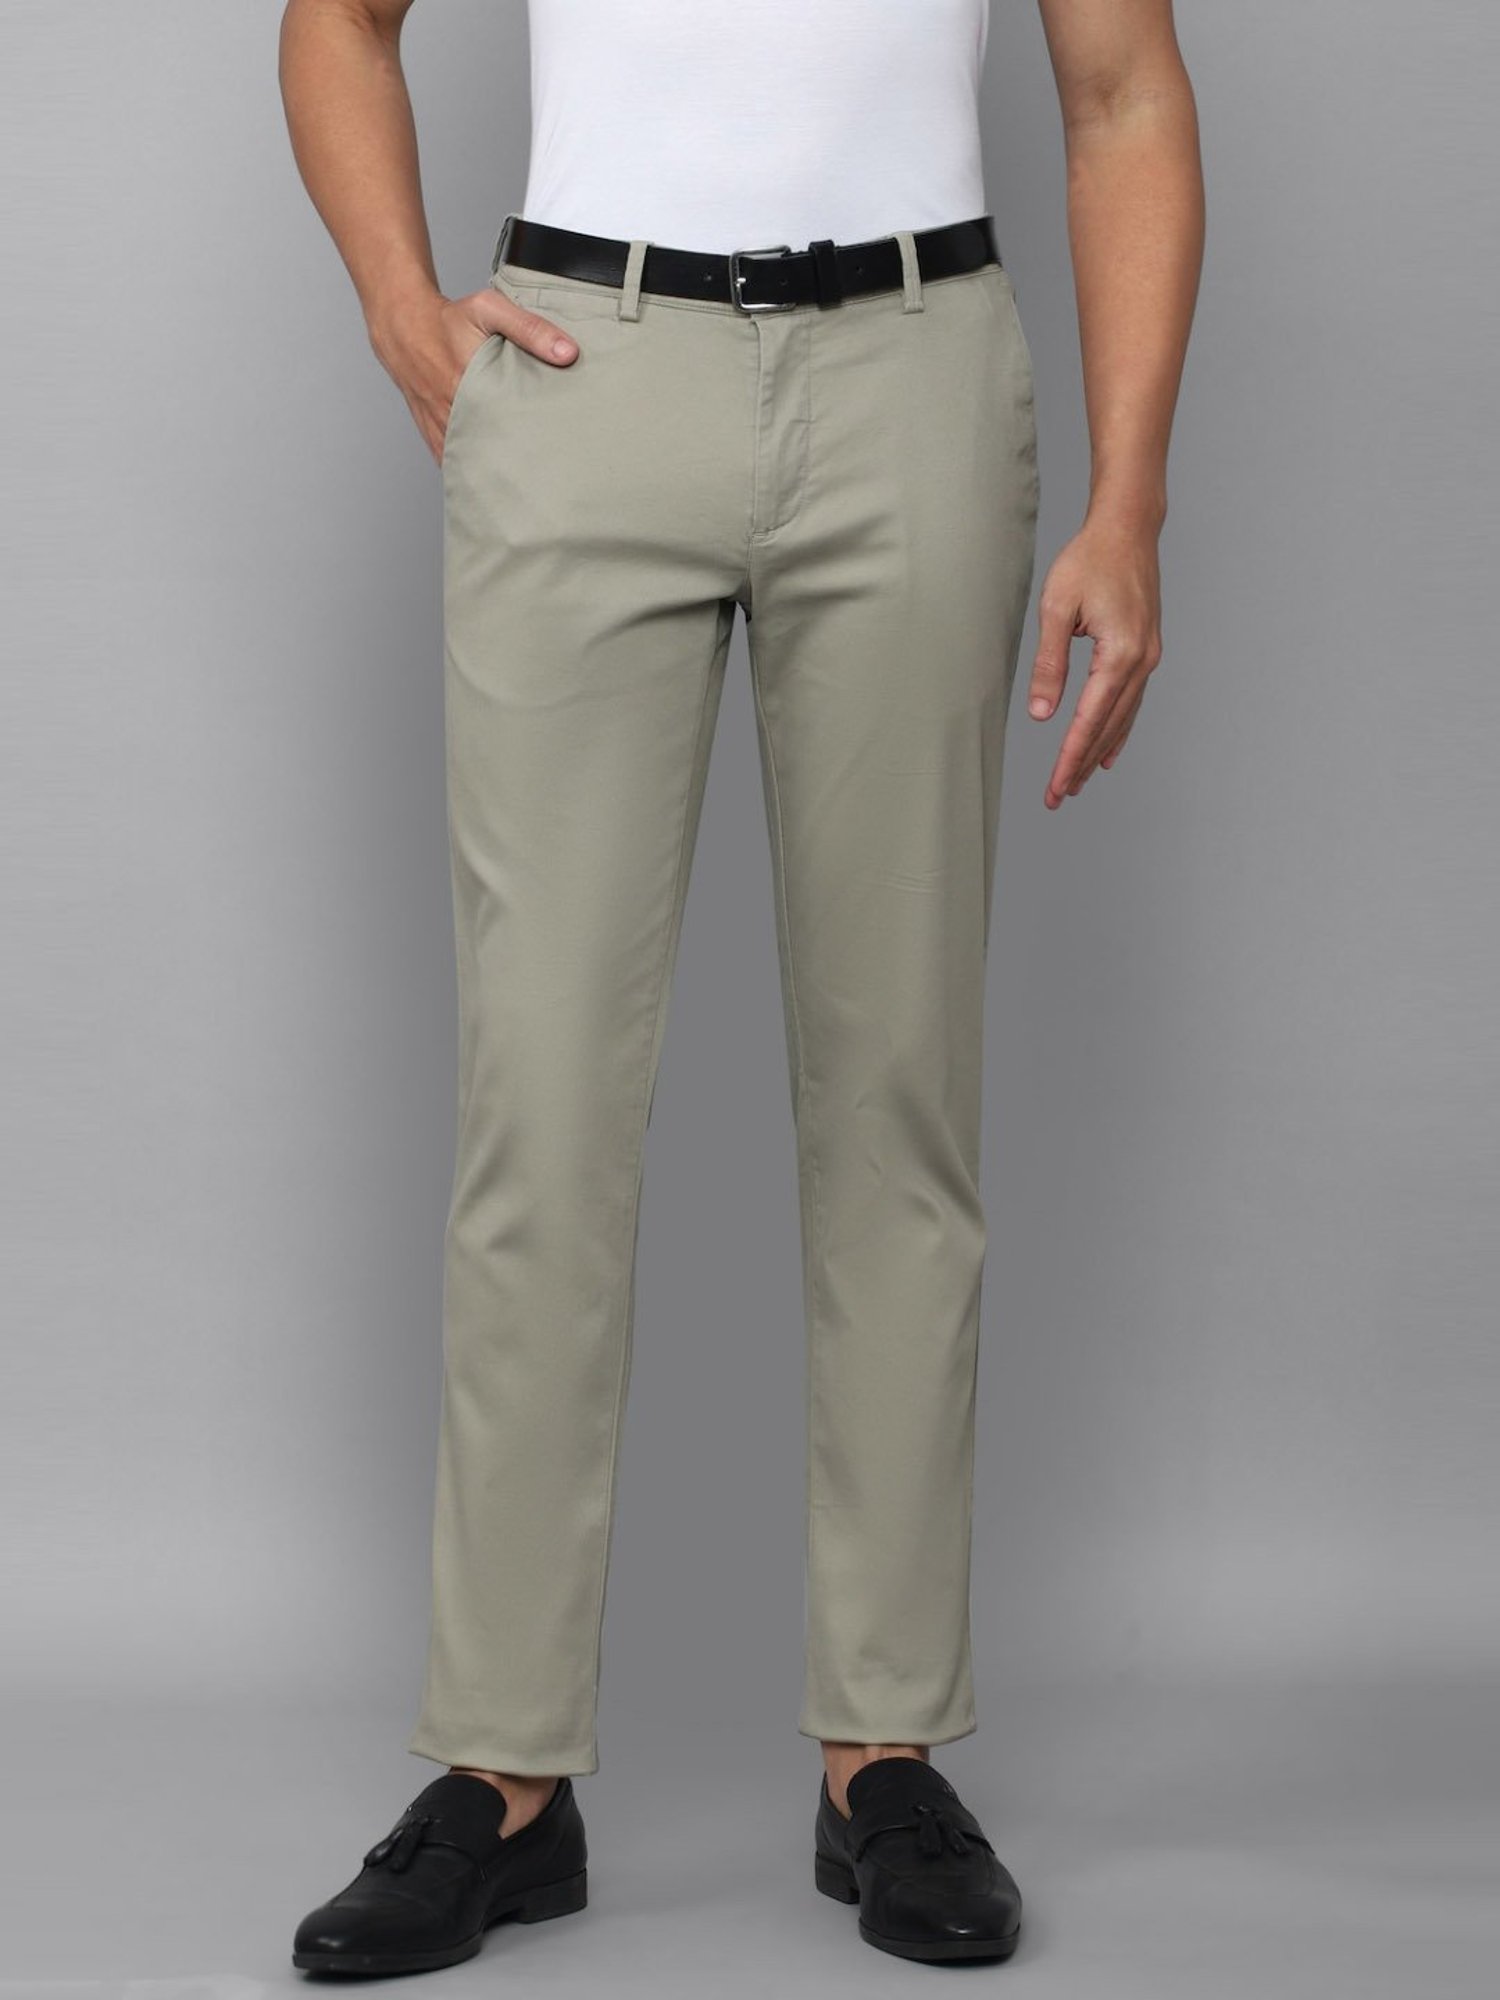 Buy LOUIS PHILIPPE Solid Polyester Cotton Regular Fit Mens Work Wear  Trousers  Shoppers Stop